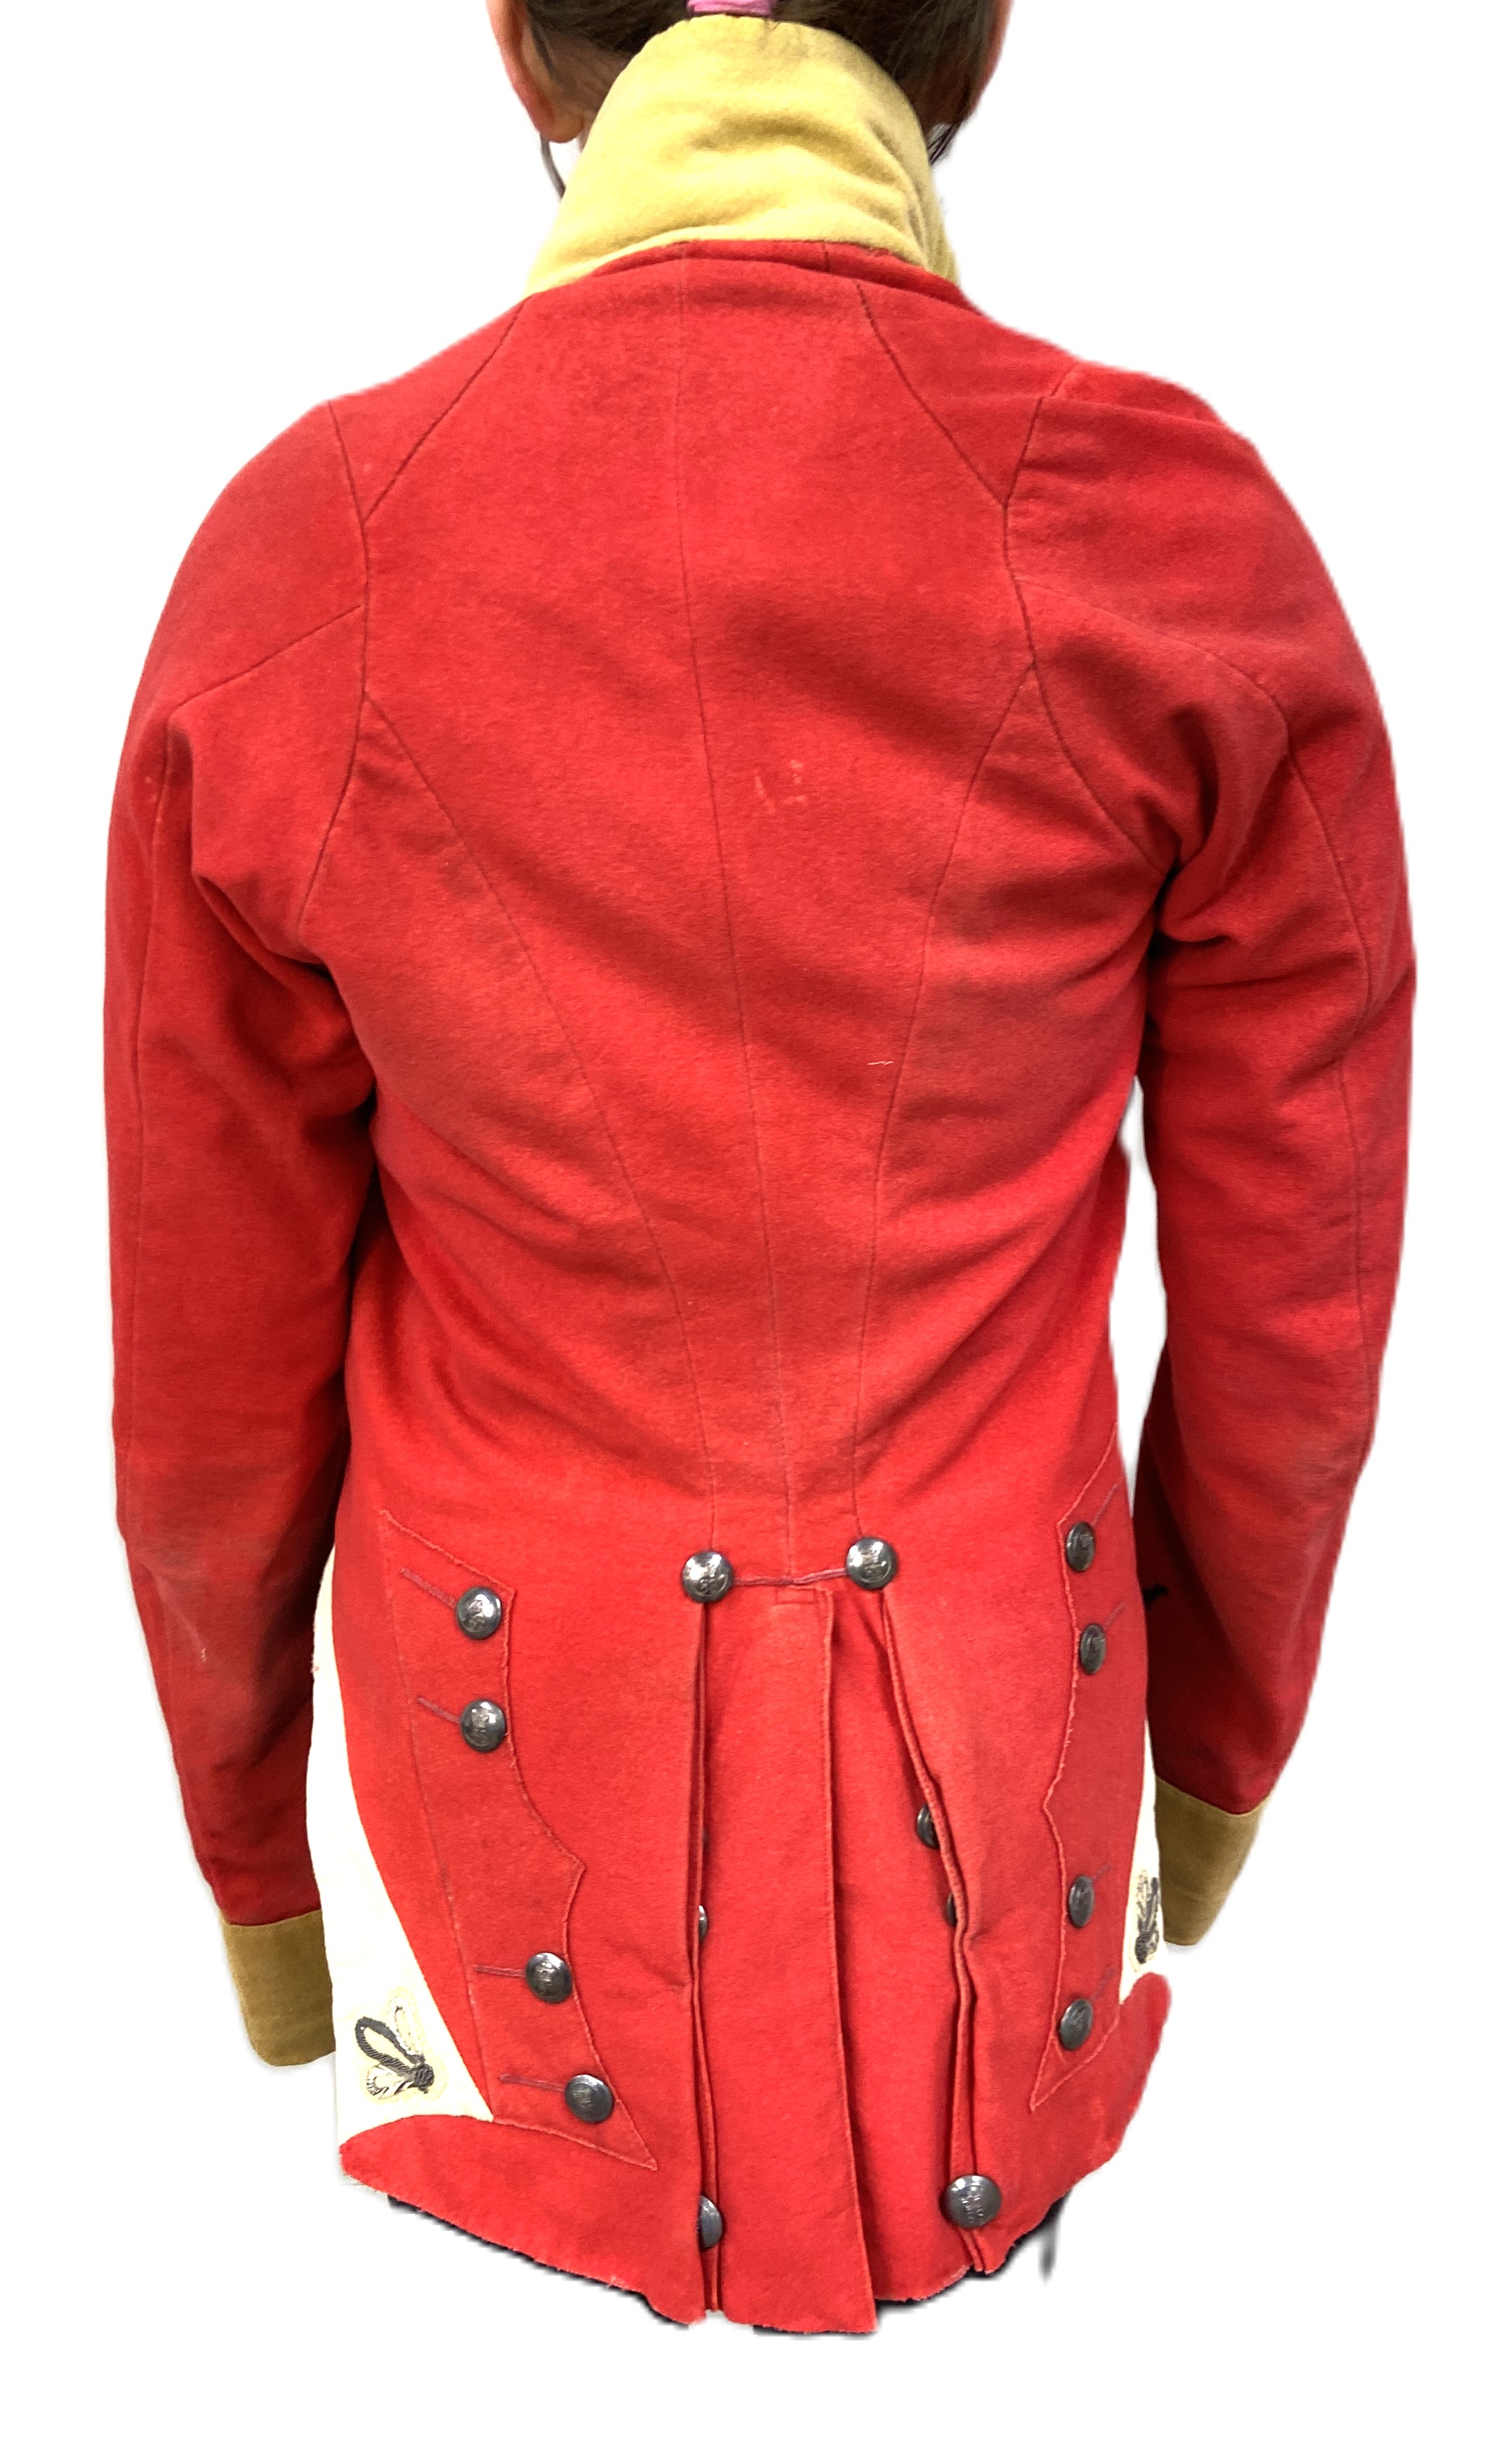 Two Regimental Officers dress red coats, 88th Regiment of Foot, The Connaught Rangers, 19th century, - Bild 15 aus 17